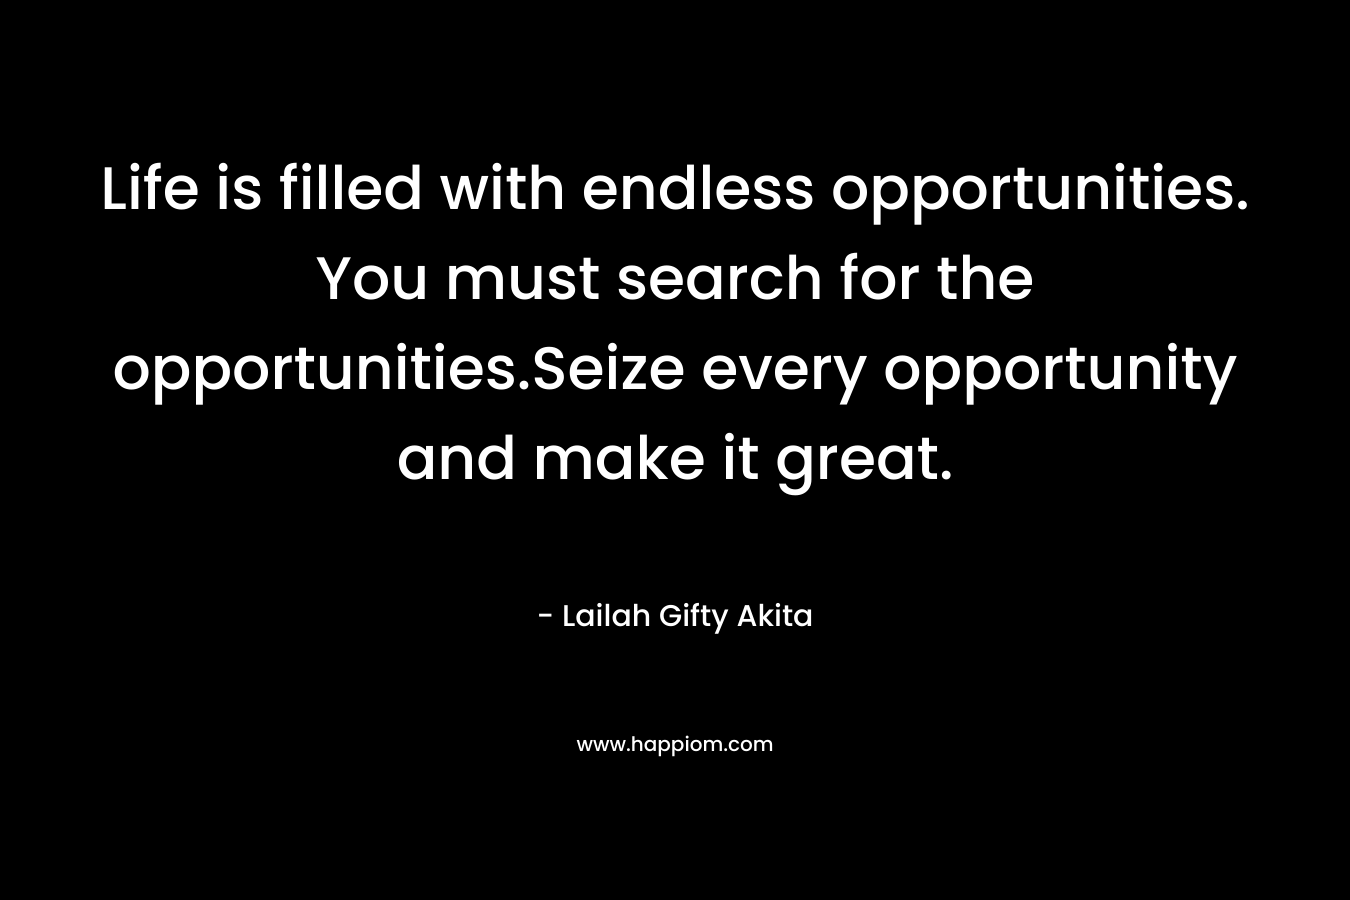 Life is filled with endless opportunities. You must search for the opportunities.Seize every opportunity and make it great.